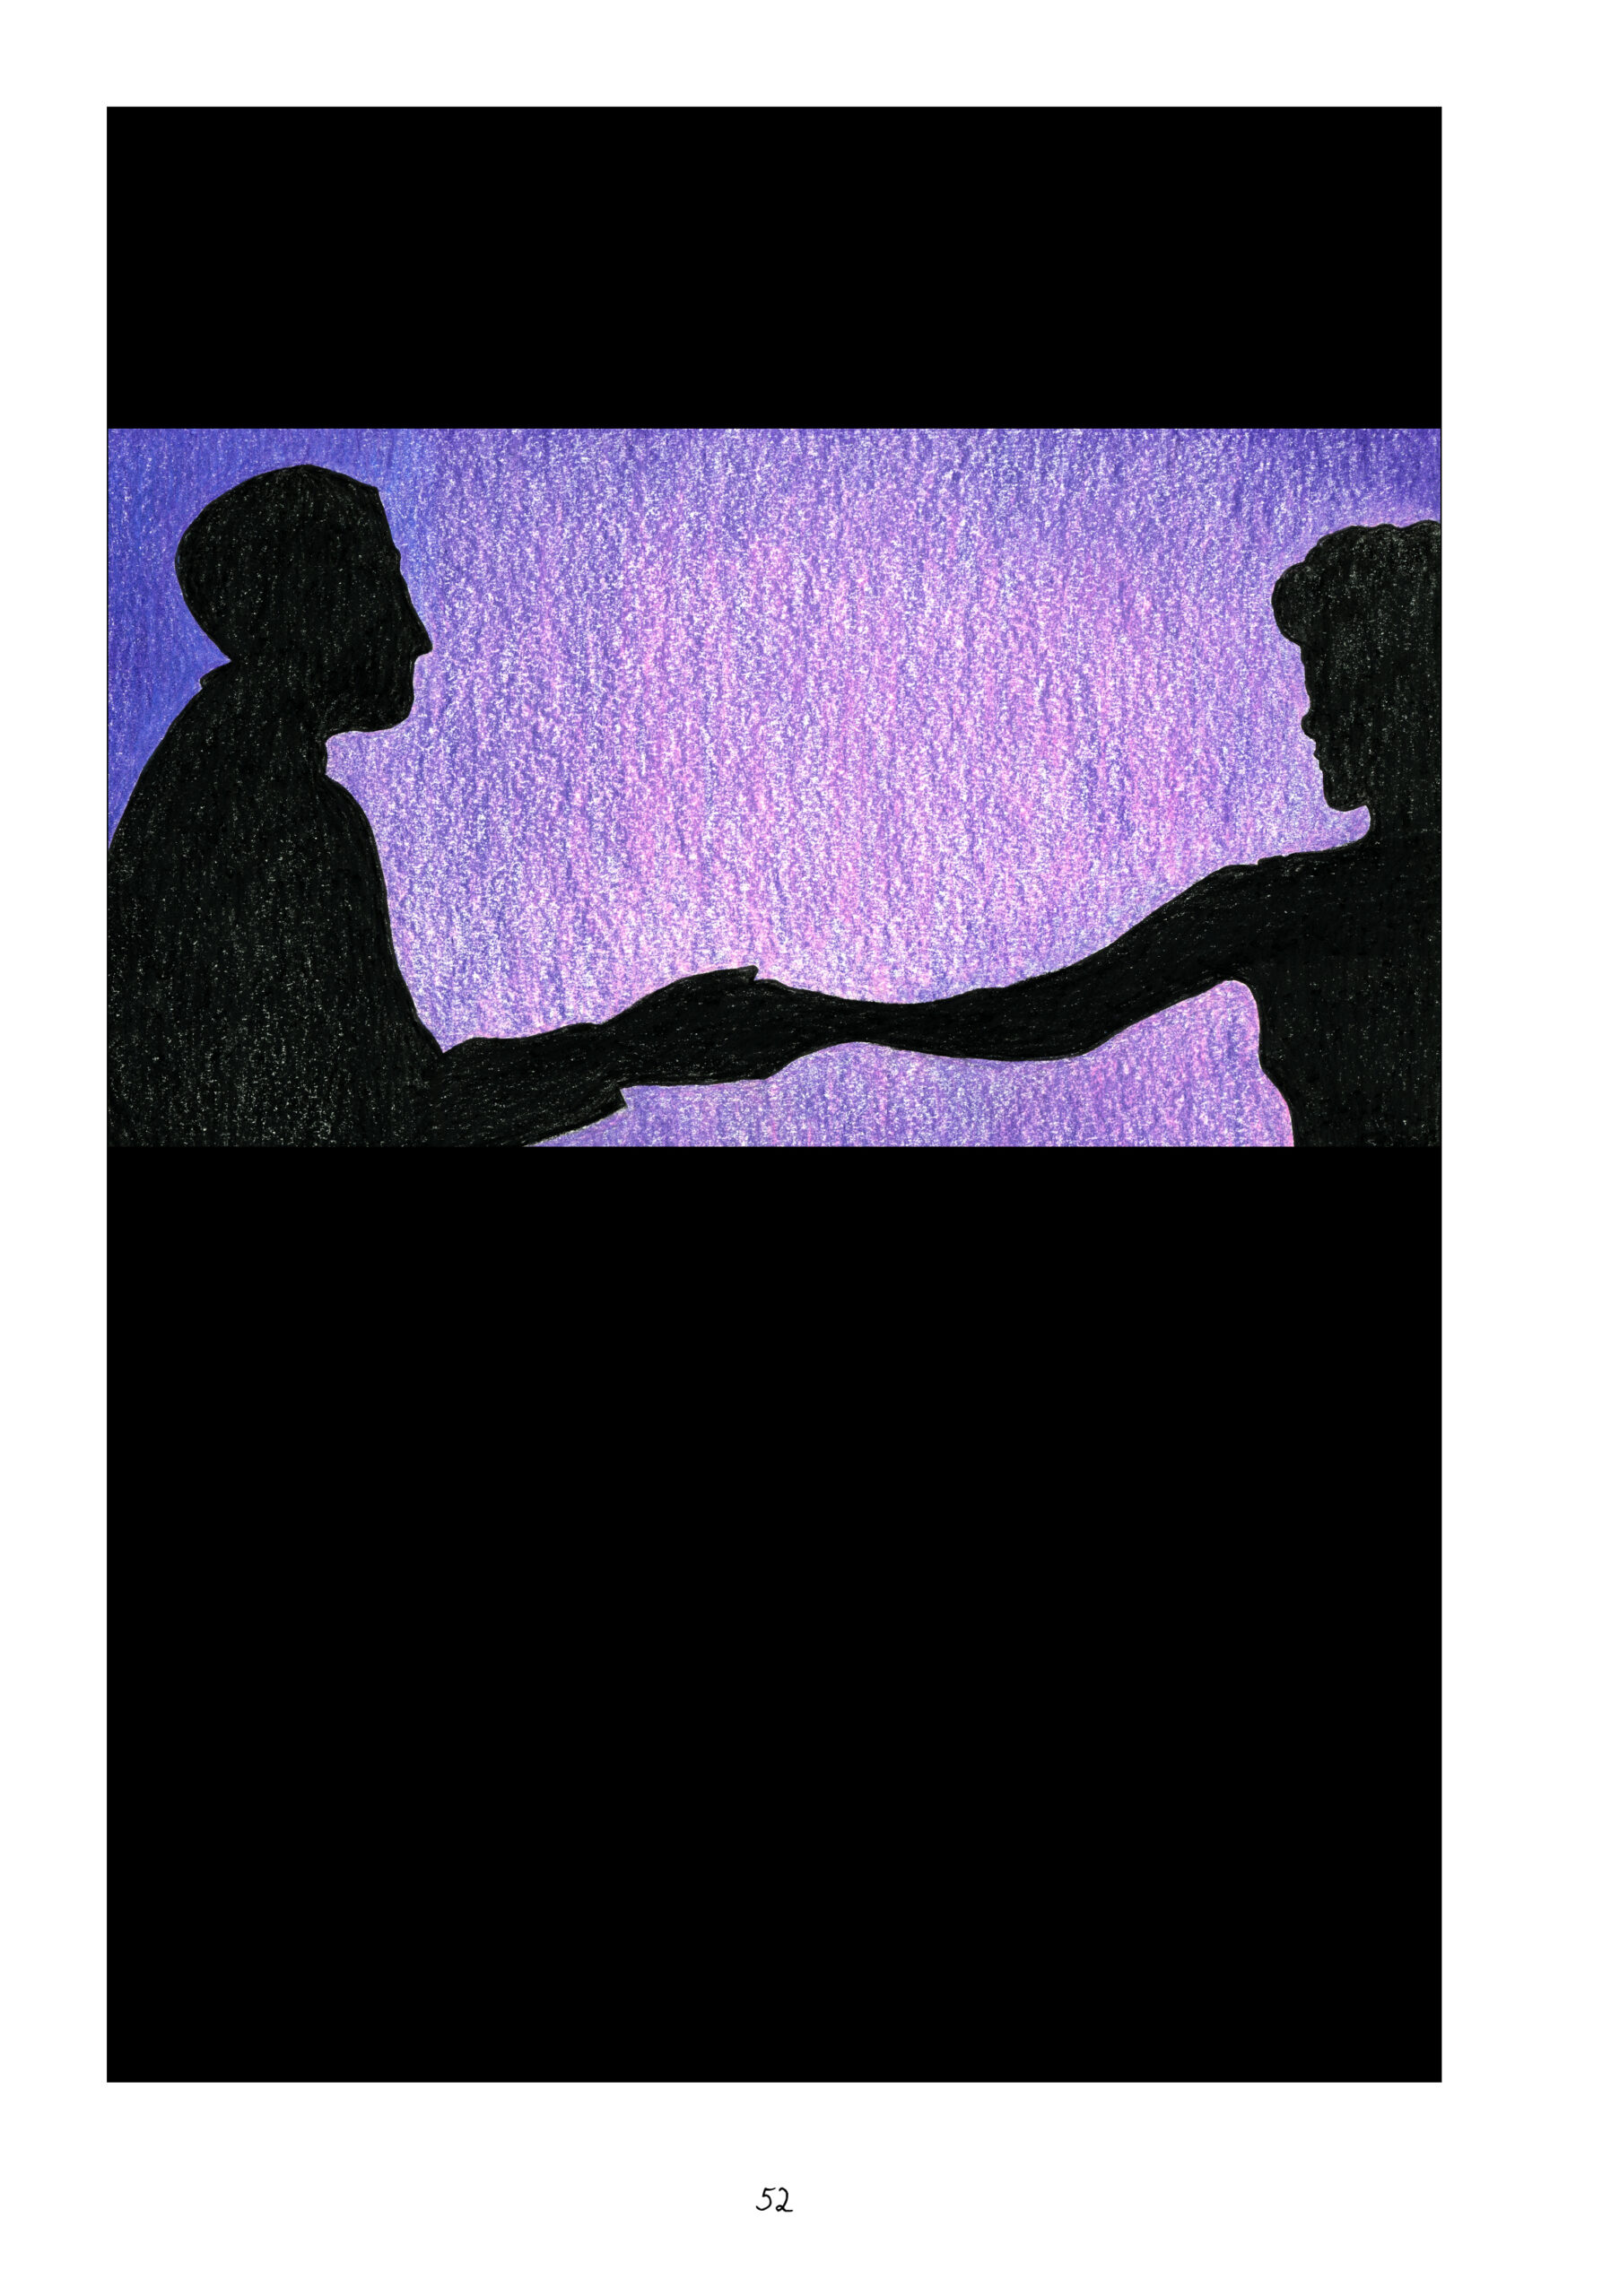 Over a black page, a panel that takes up about a third of the space shows silhouettes of Lorraine and Lynn's father dancing, reaching out to hold each other's hand as if to finish a spin. The background is blue and purple.